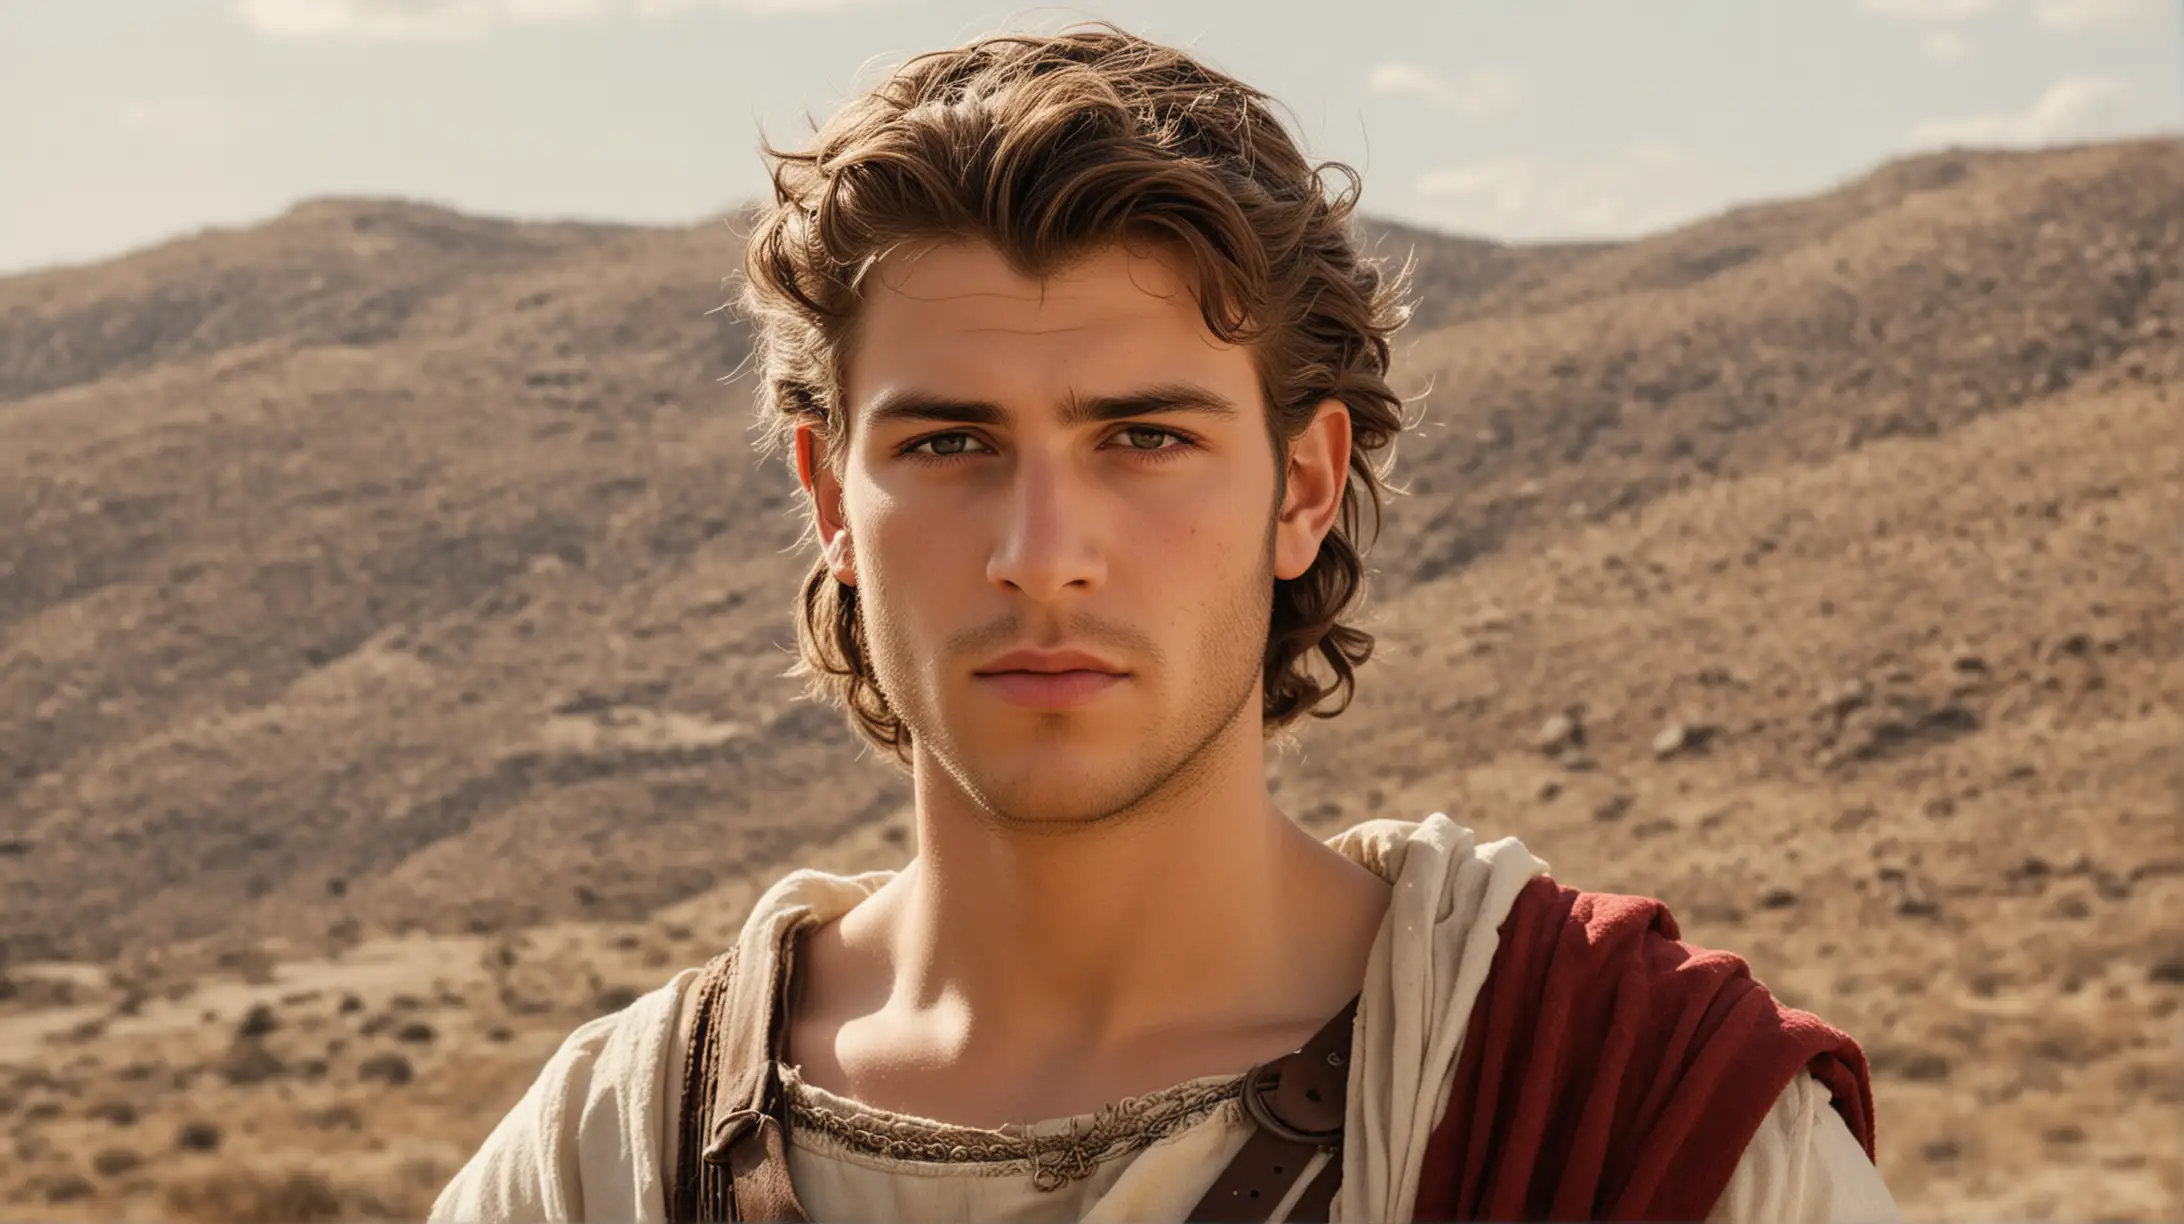 A close up of a young handsome Biblical King David standing on a desert hilly field and a white sunny sky,   Set during the Biblical Era of King David.